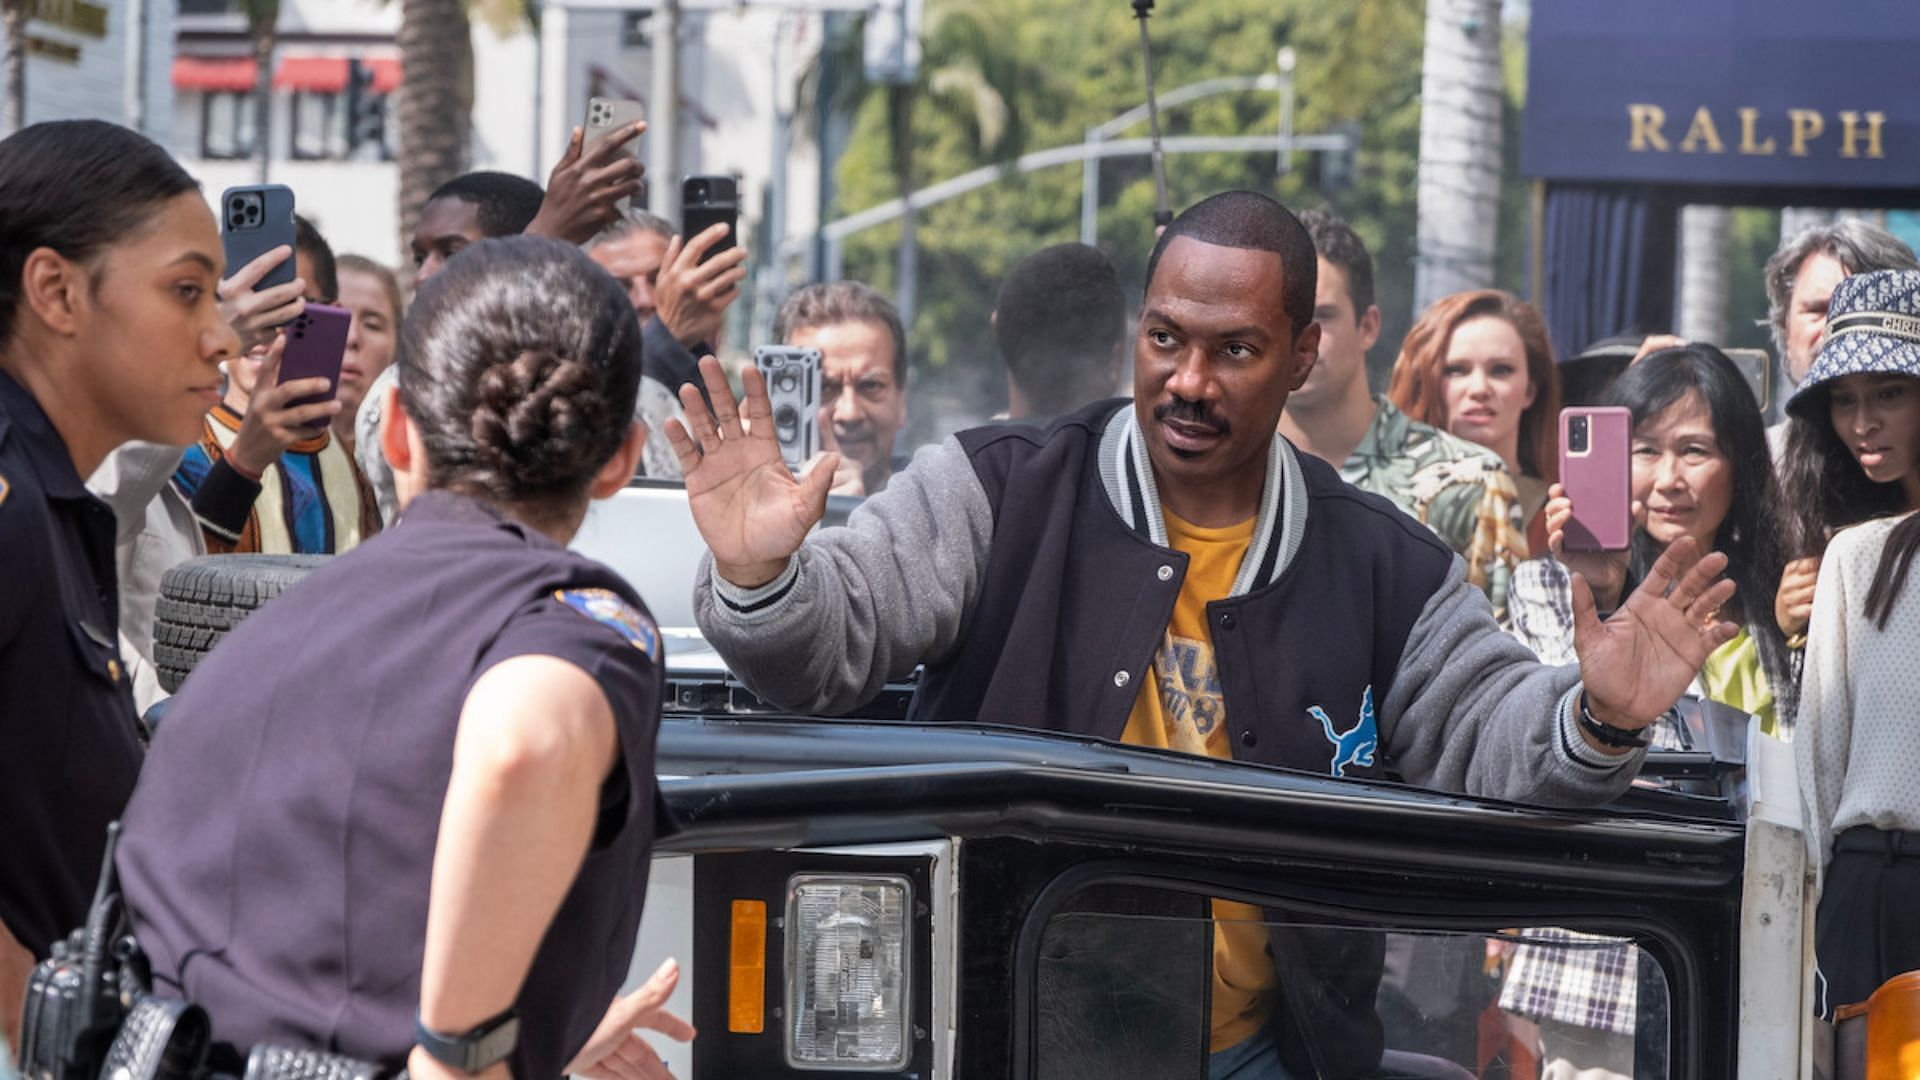 Upcoming comedy movies: &#039;Beverly Hills Cop: Axel F&#039; (Image via Netflix)